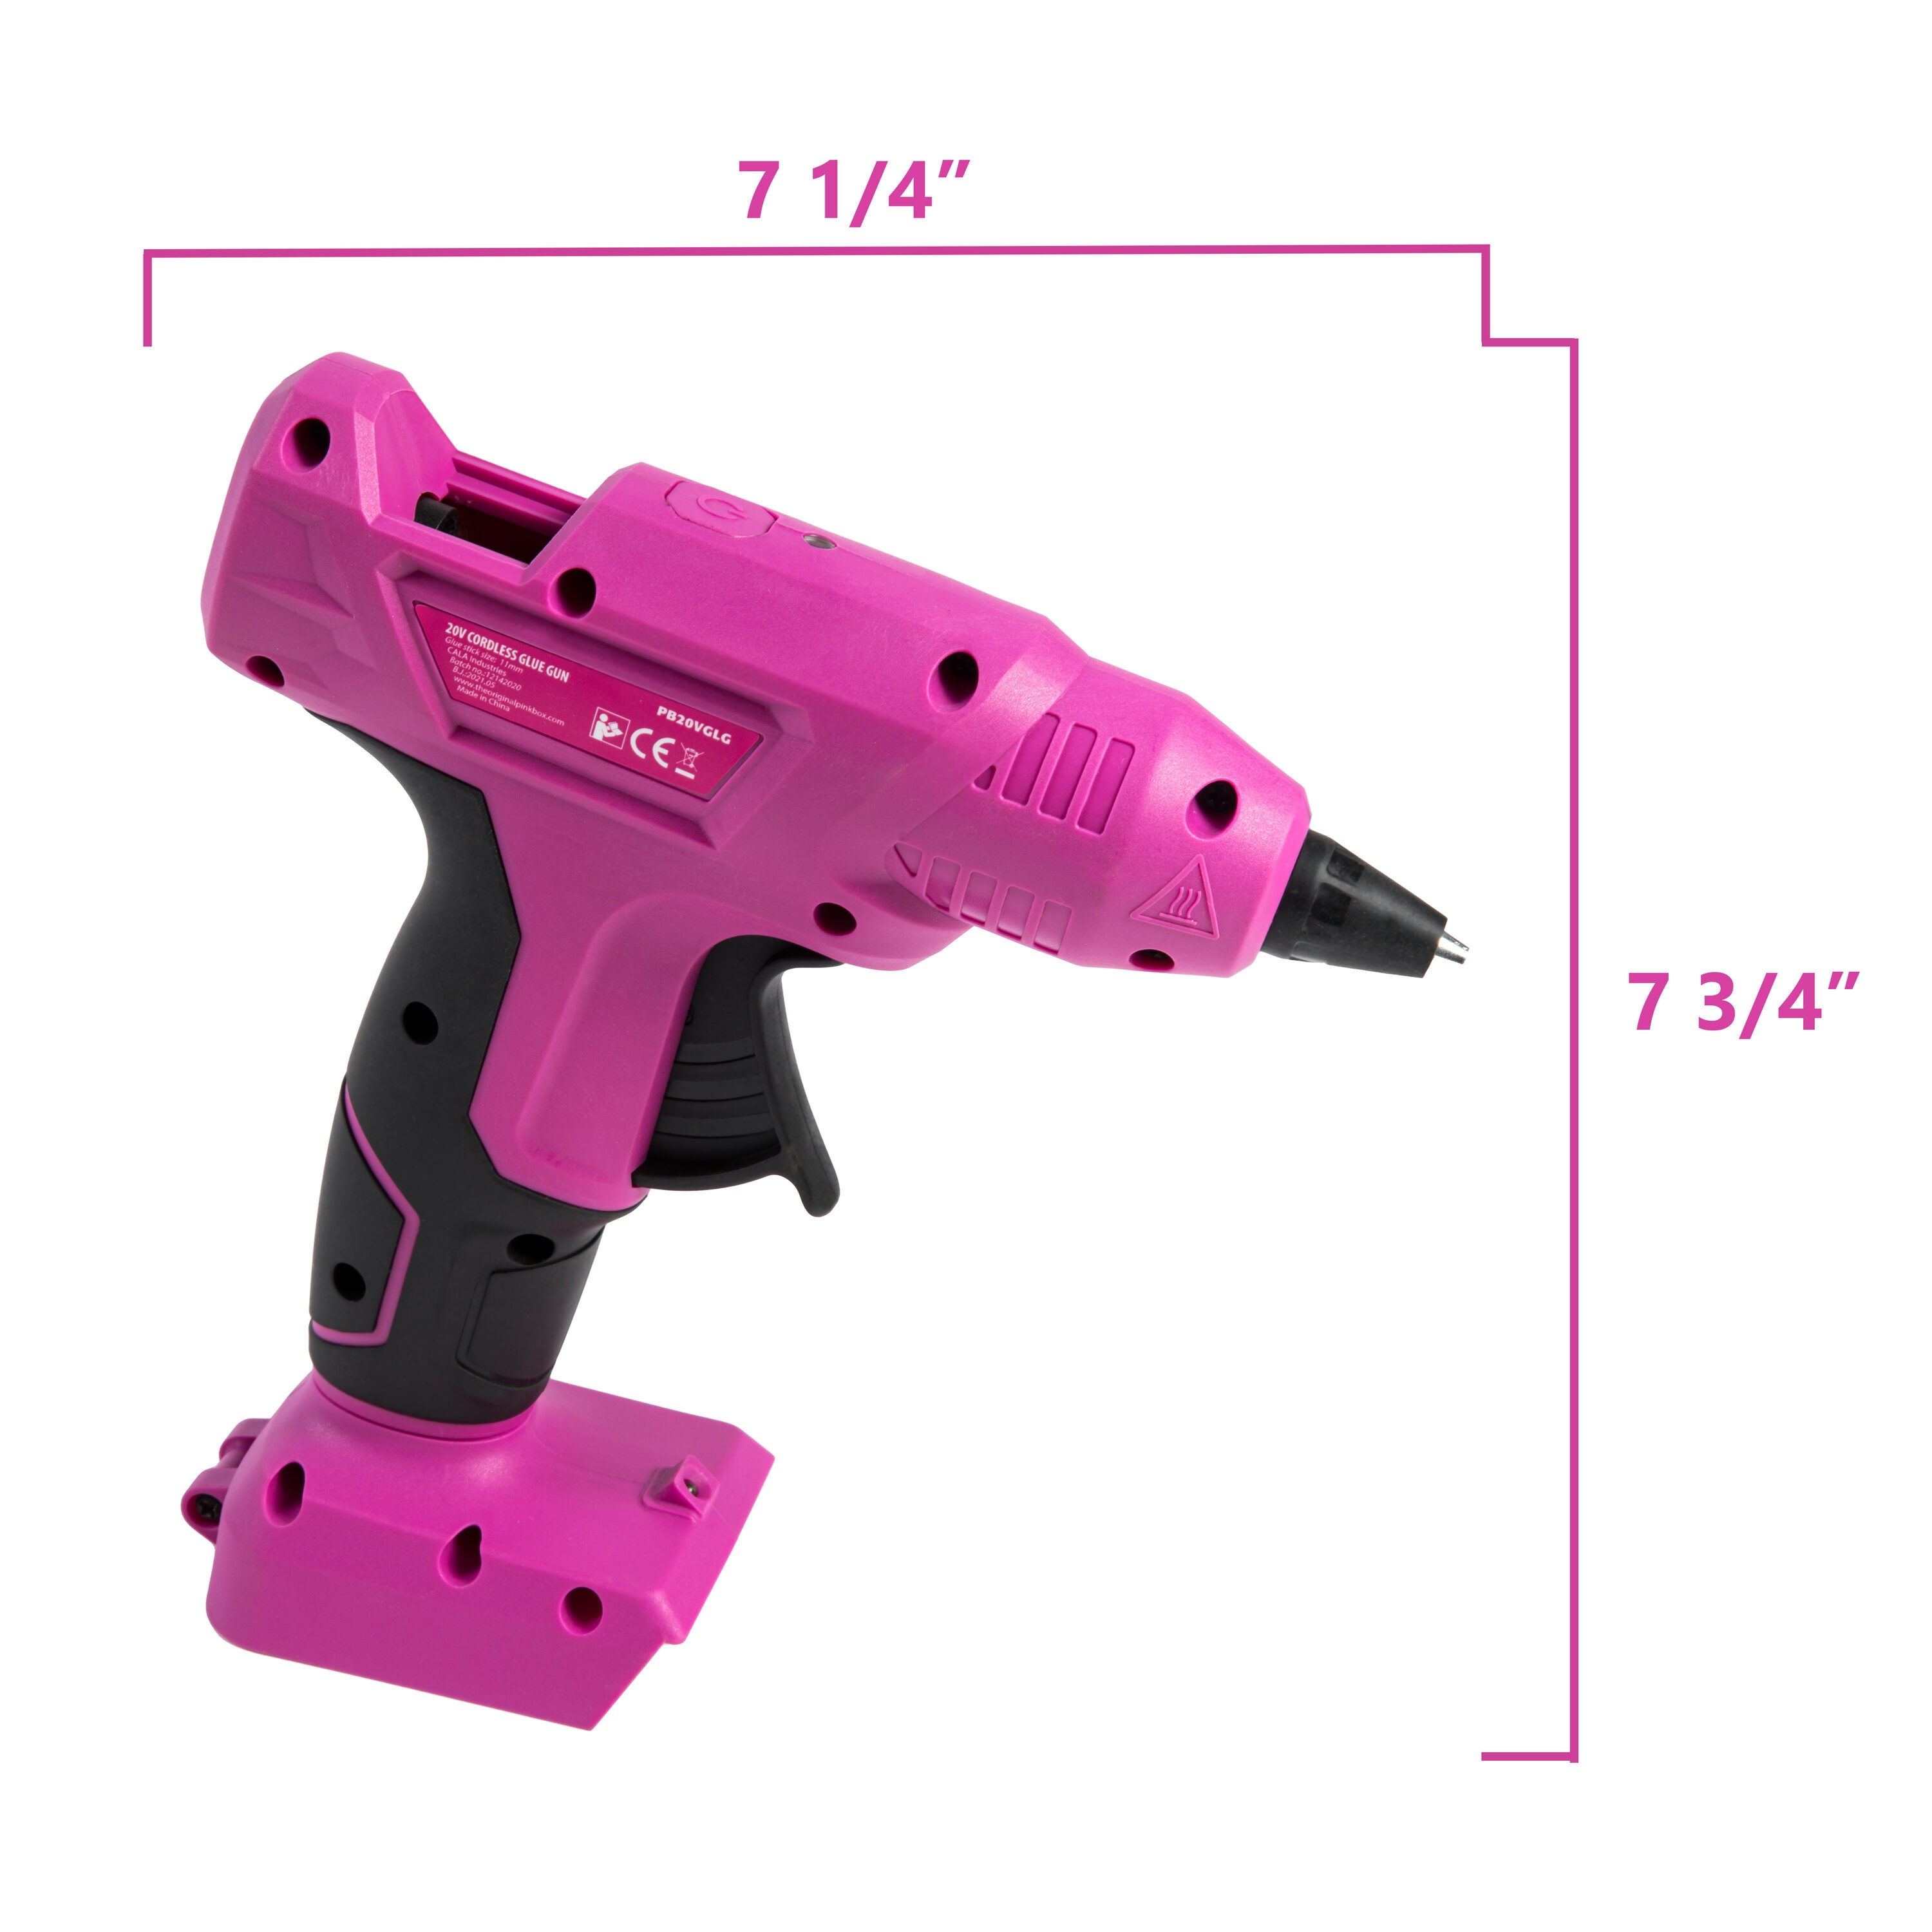  Pink Power Cordless Mini Hot Glue Gun with Stand - USB  Rechargeable Wireless Hot Melt Glue Gun Kit with 20 Glue Sticks - Battery  Operated Cordless Glue Gun for Crafts 